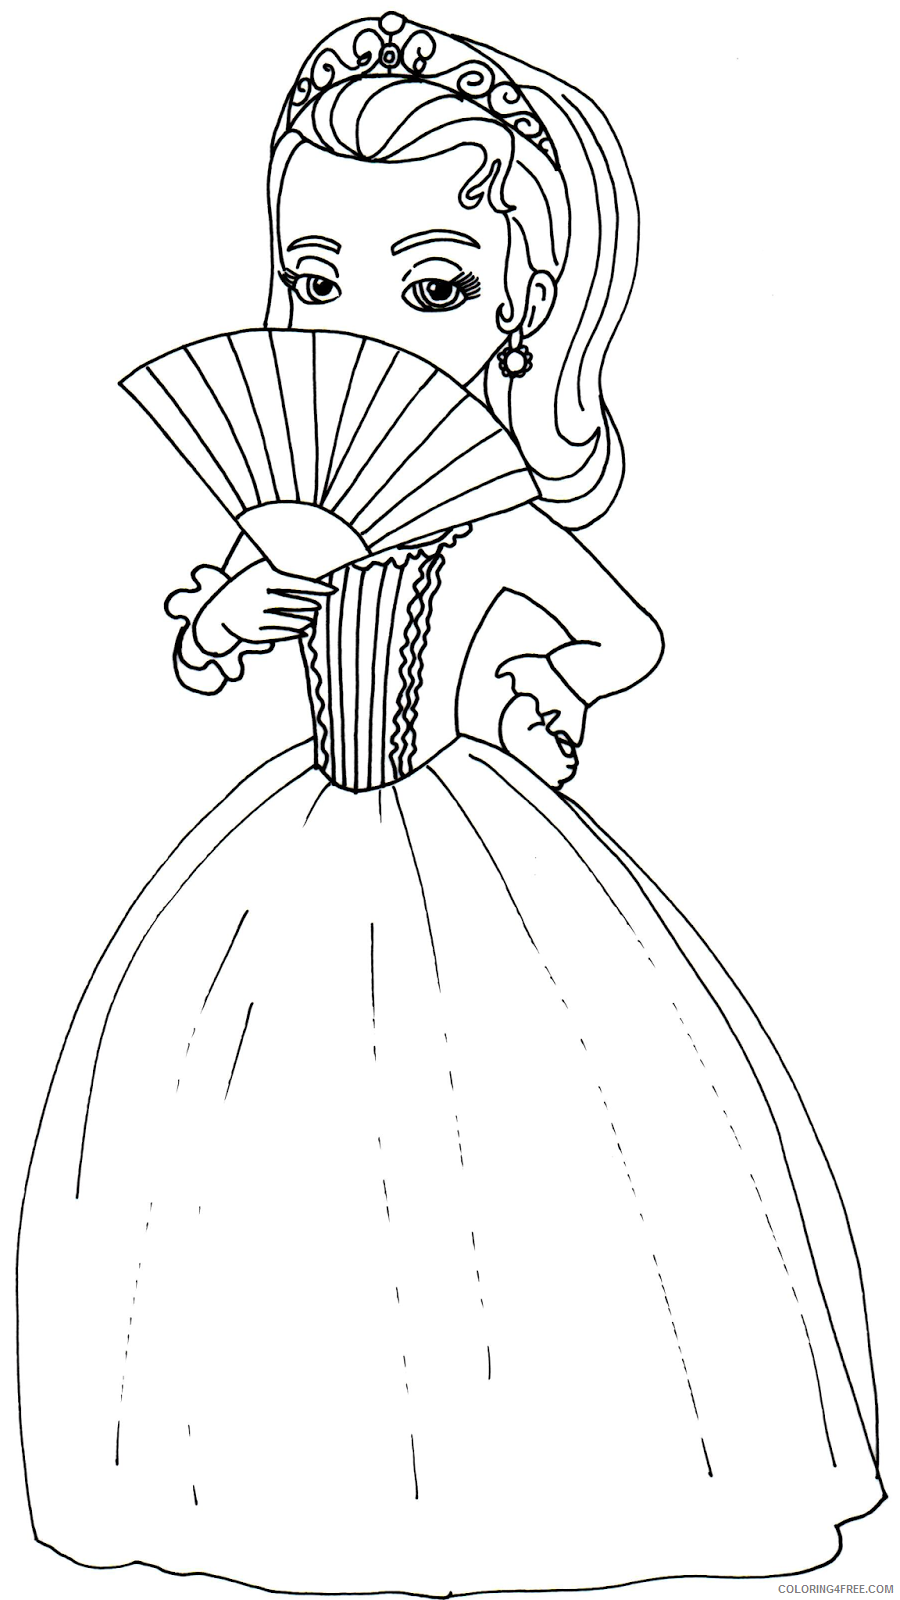 princess sofia coloring pages amber Coloring4free